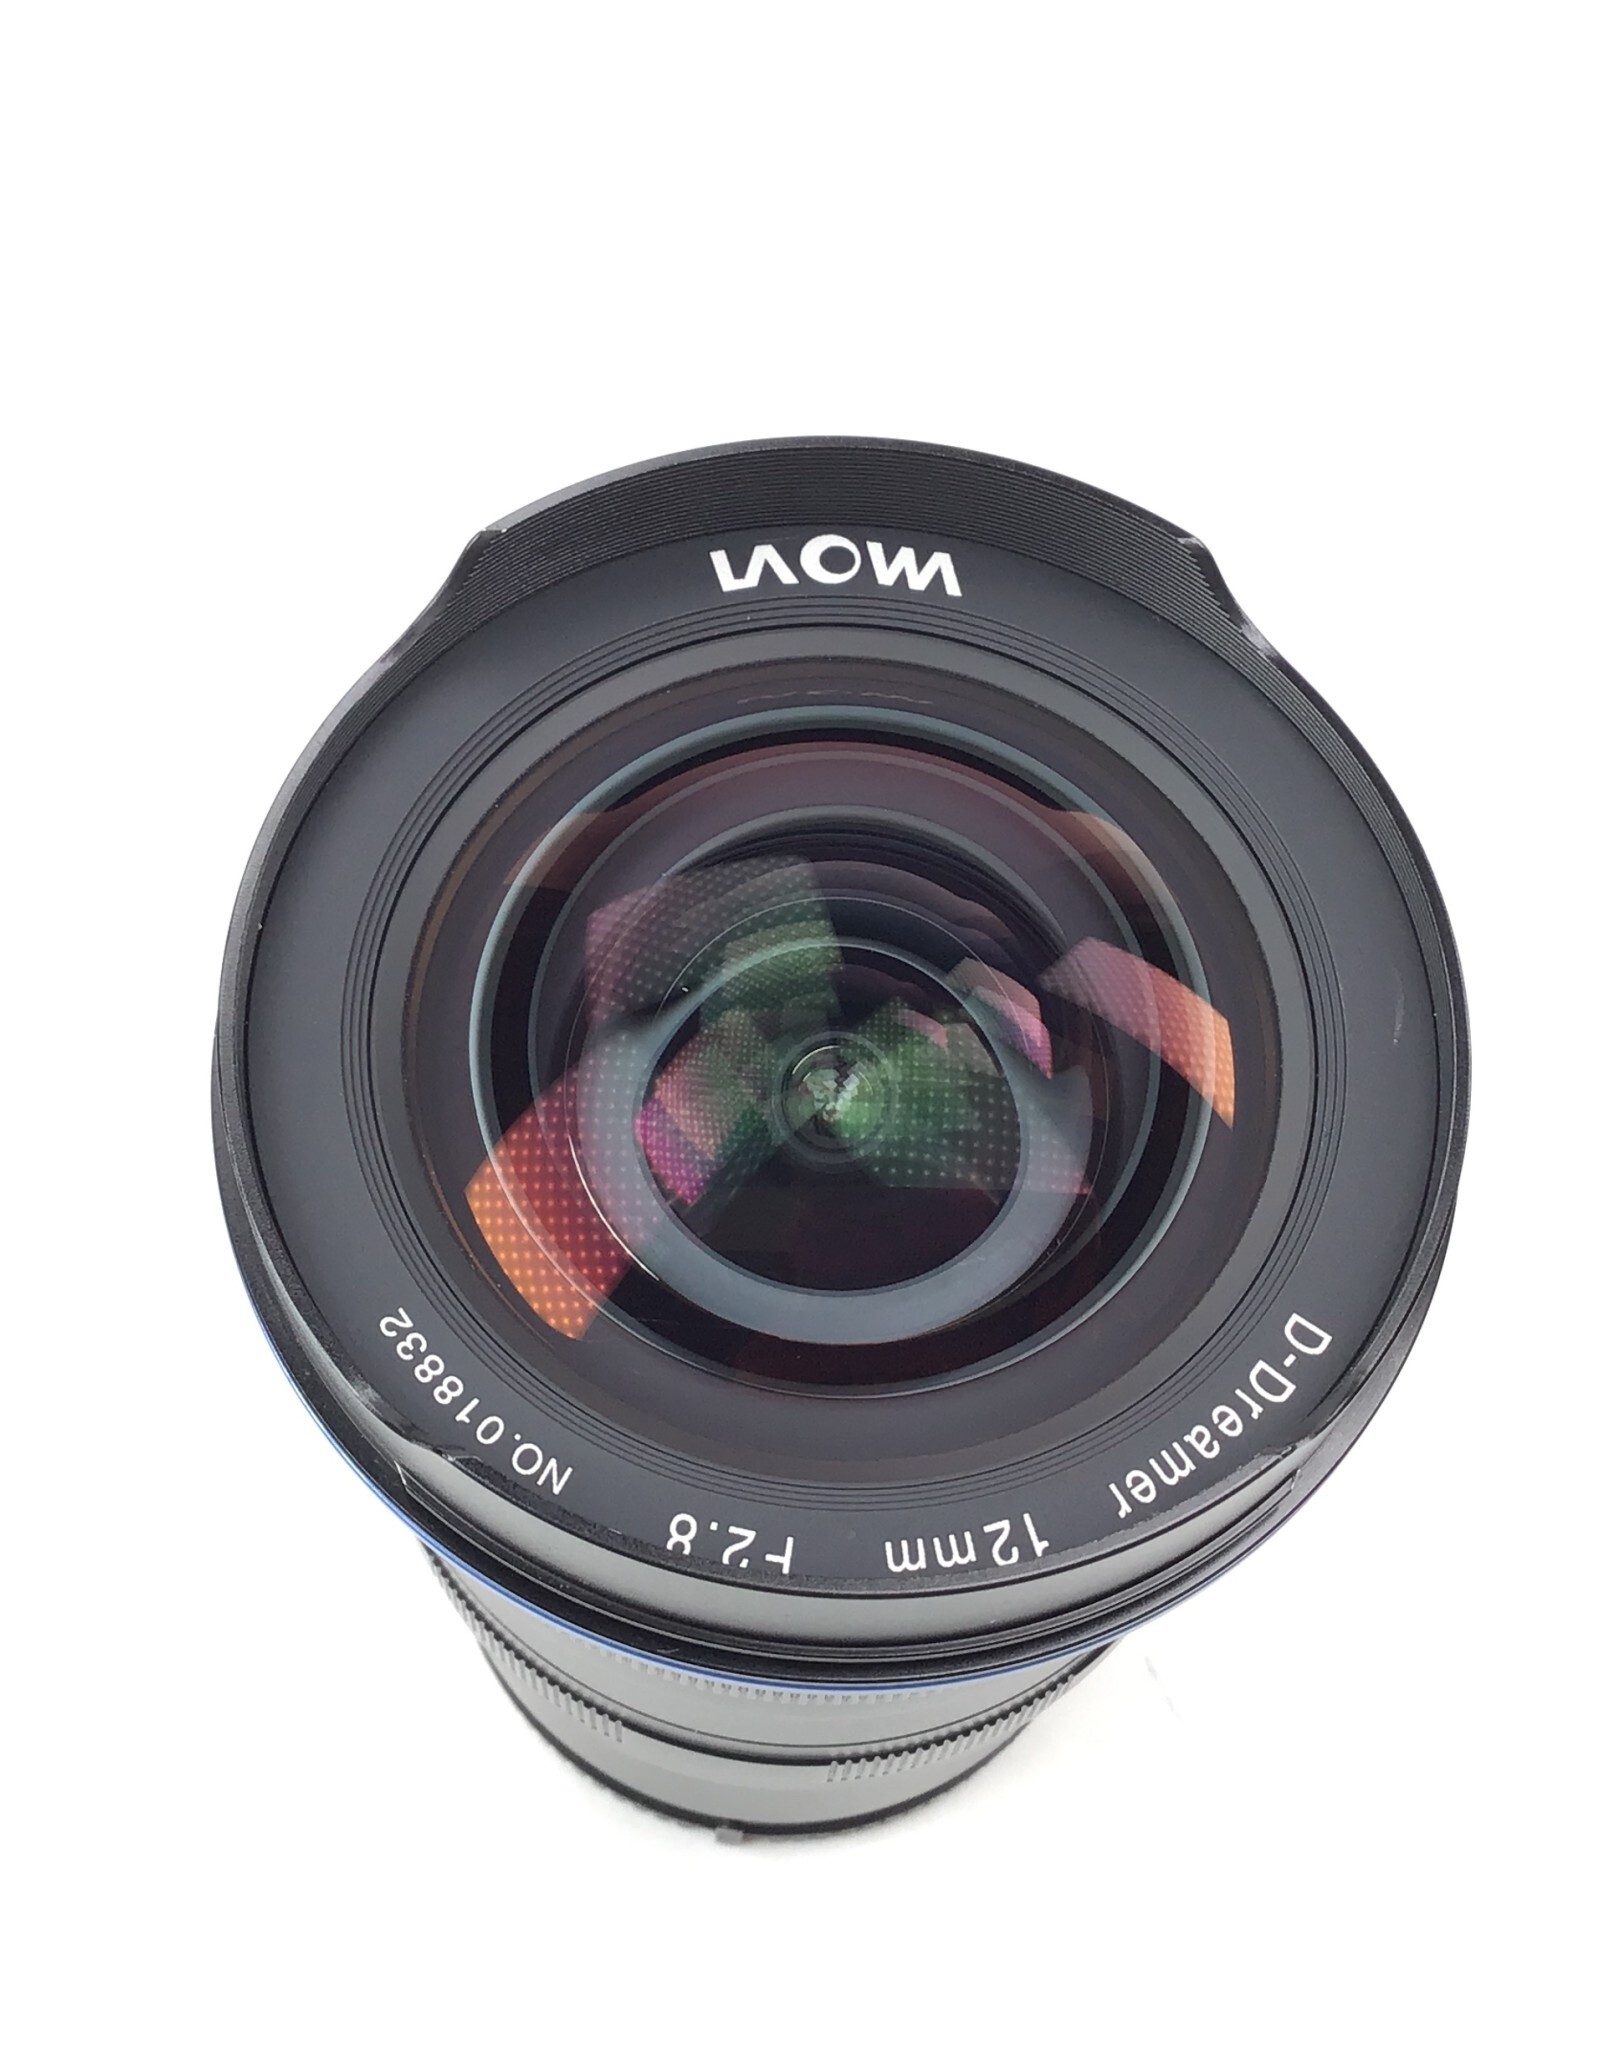 Laowa Dreamer 12mm f2.8 Lens for Sony Used Good